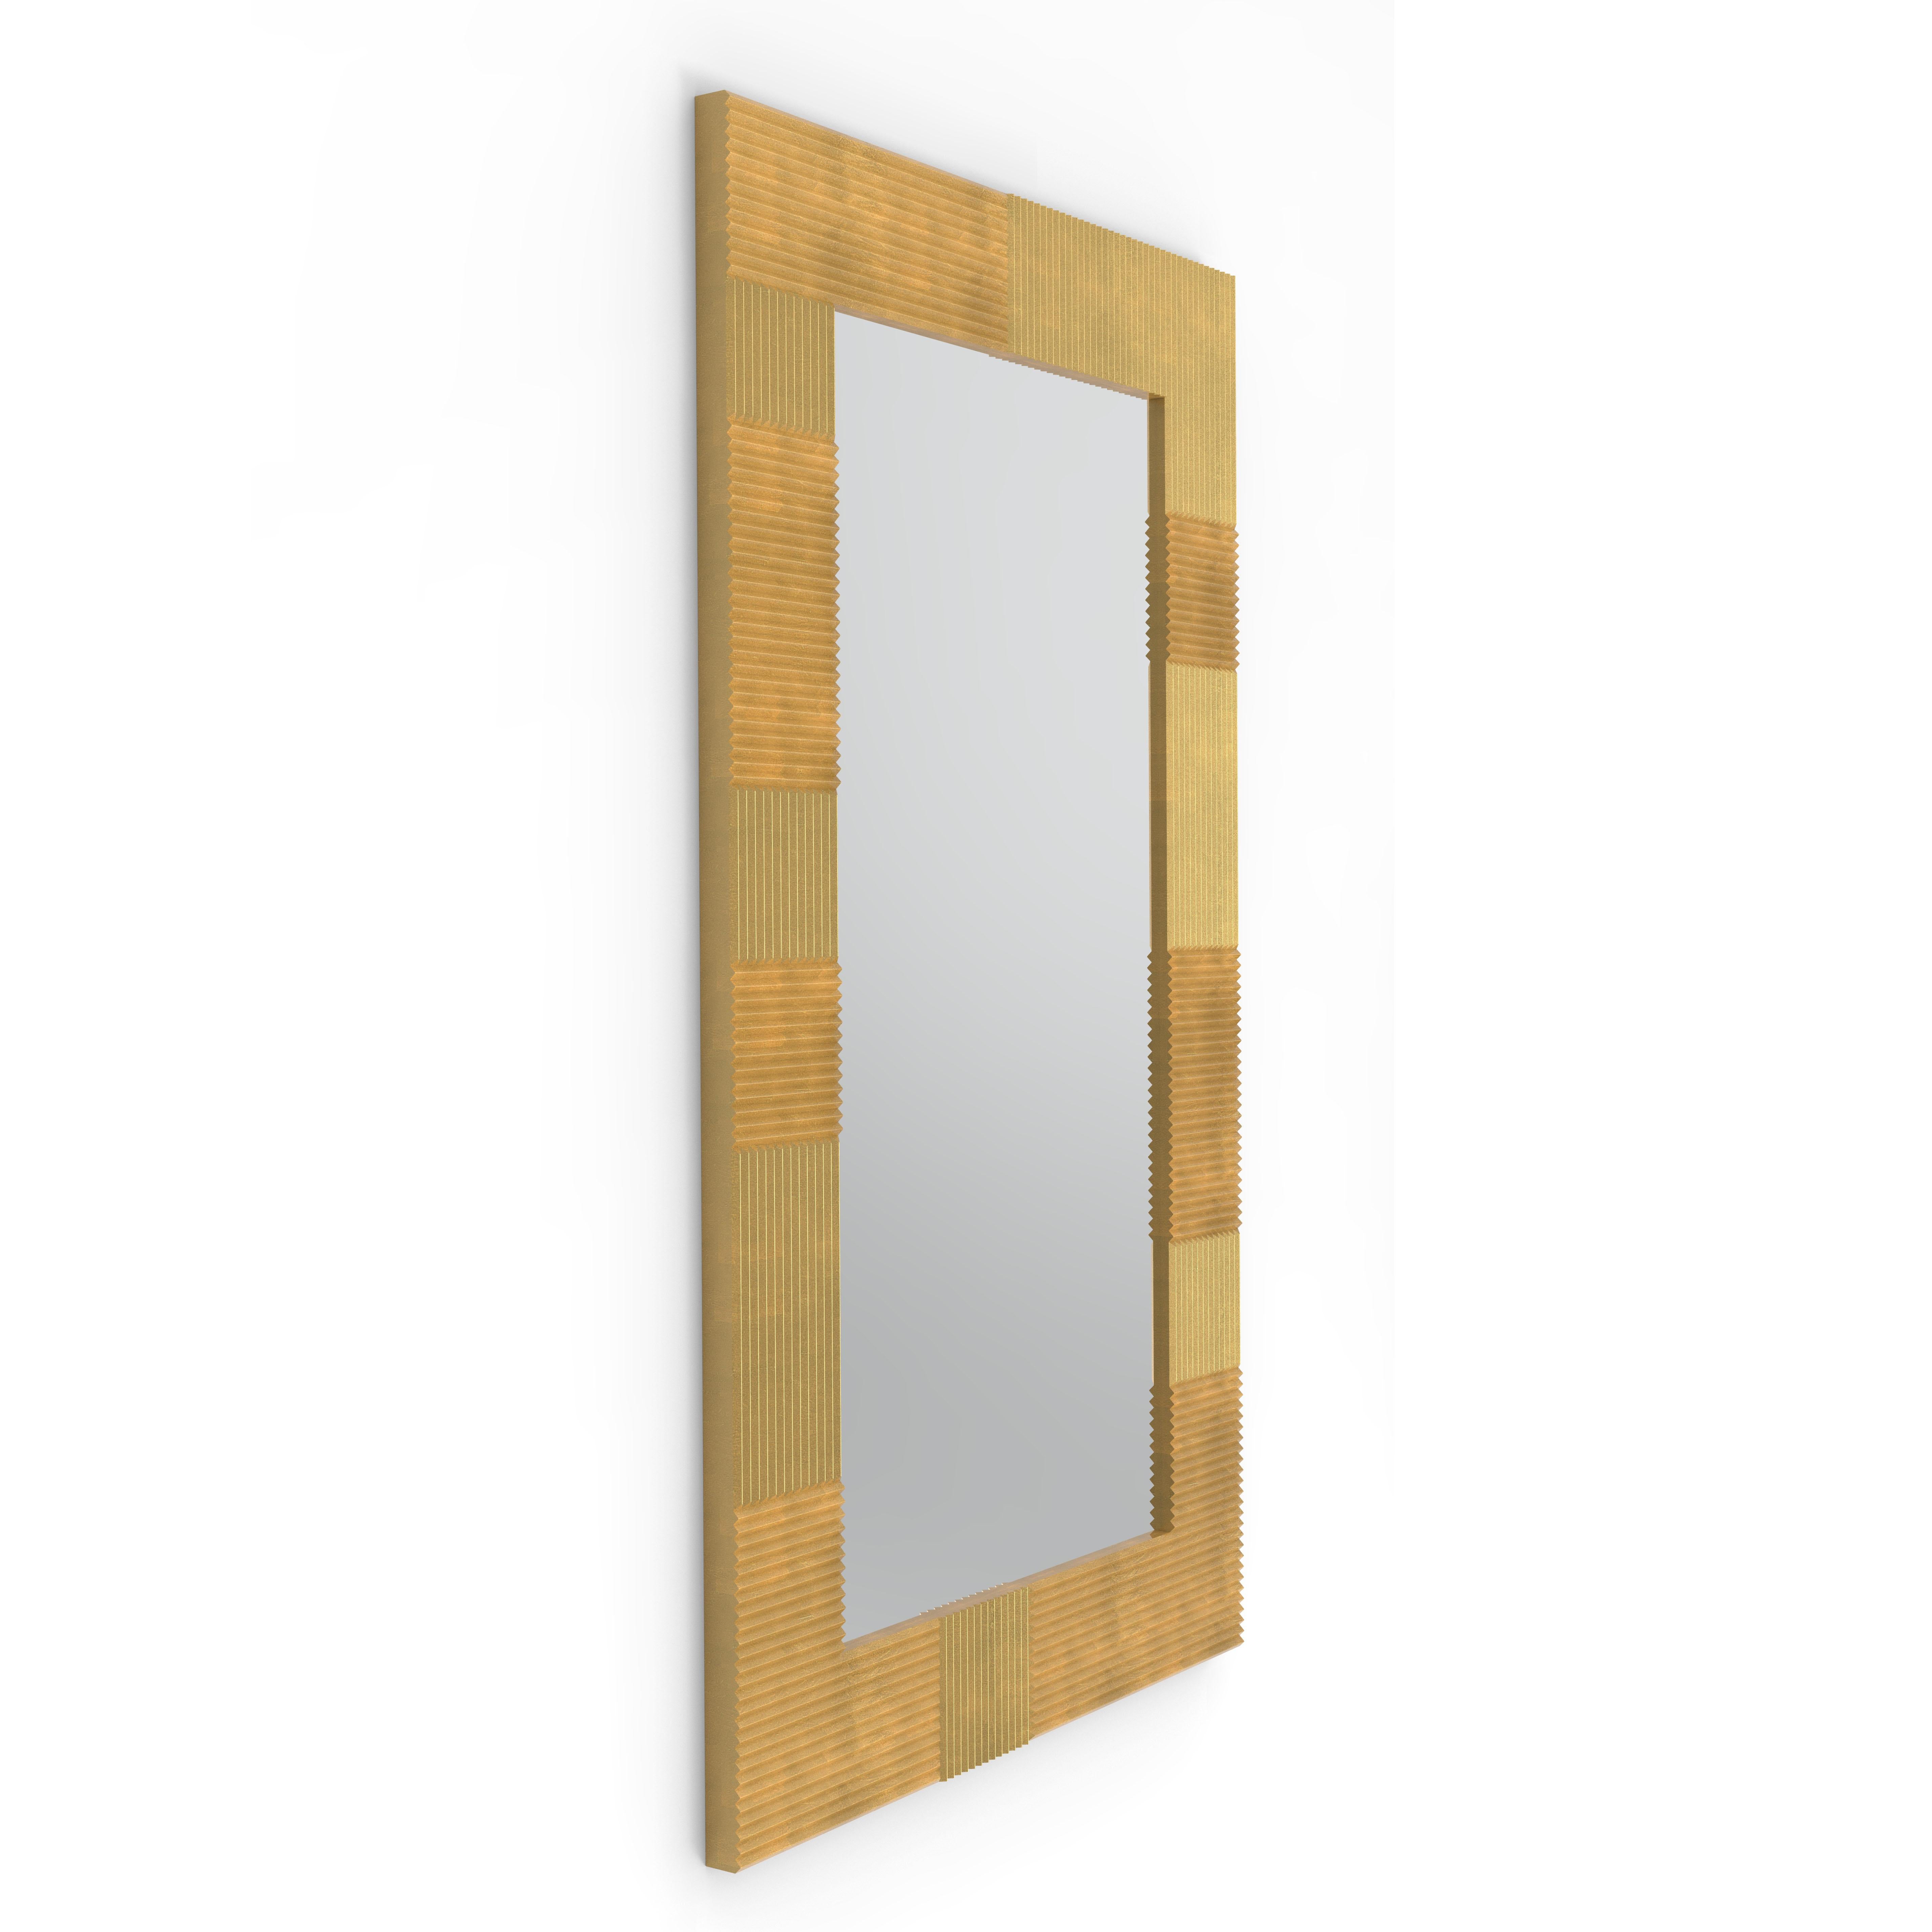 Mirror with machining done by CNC machine but finishing and sanding by hand. Available in square or rectangular variants in white, black or hand-stretched gold leaf